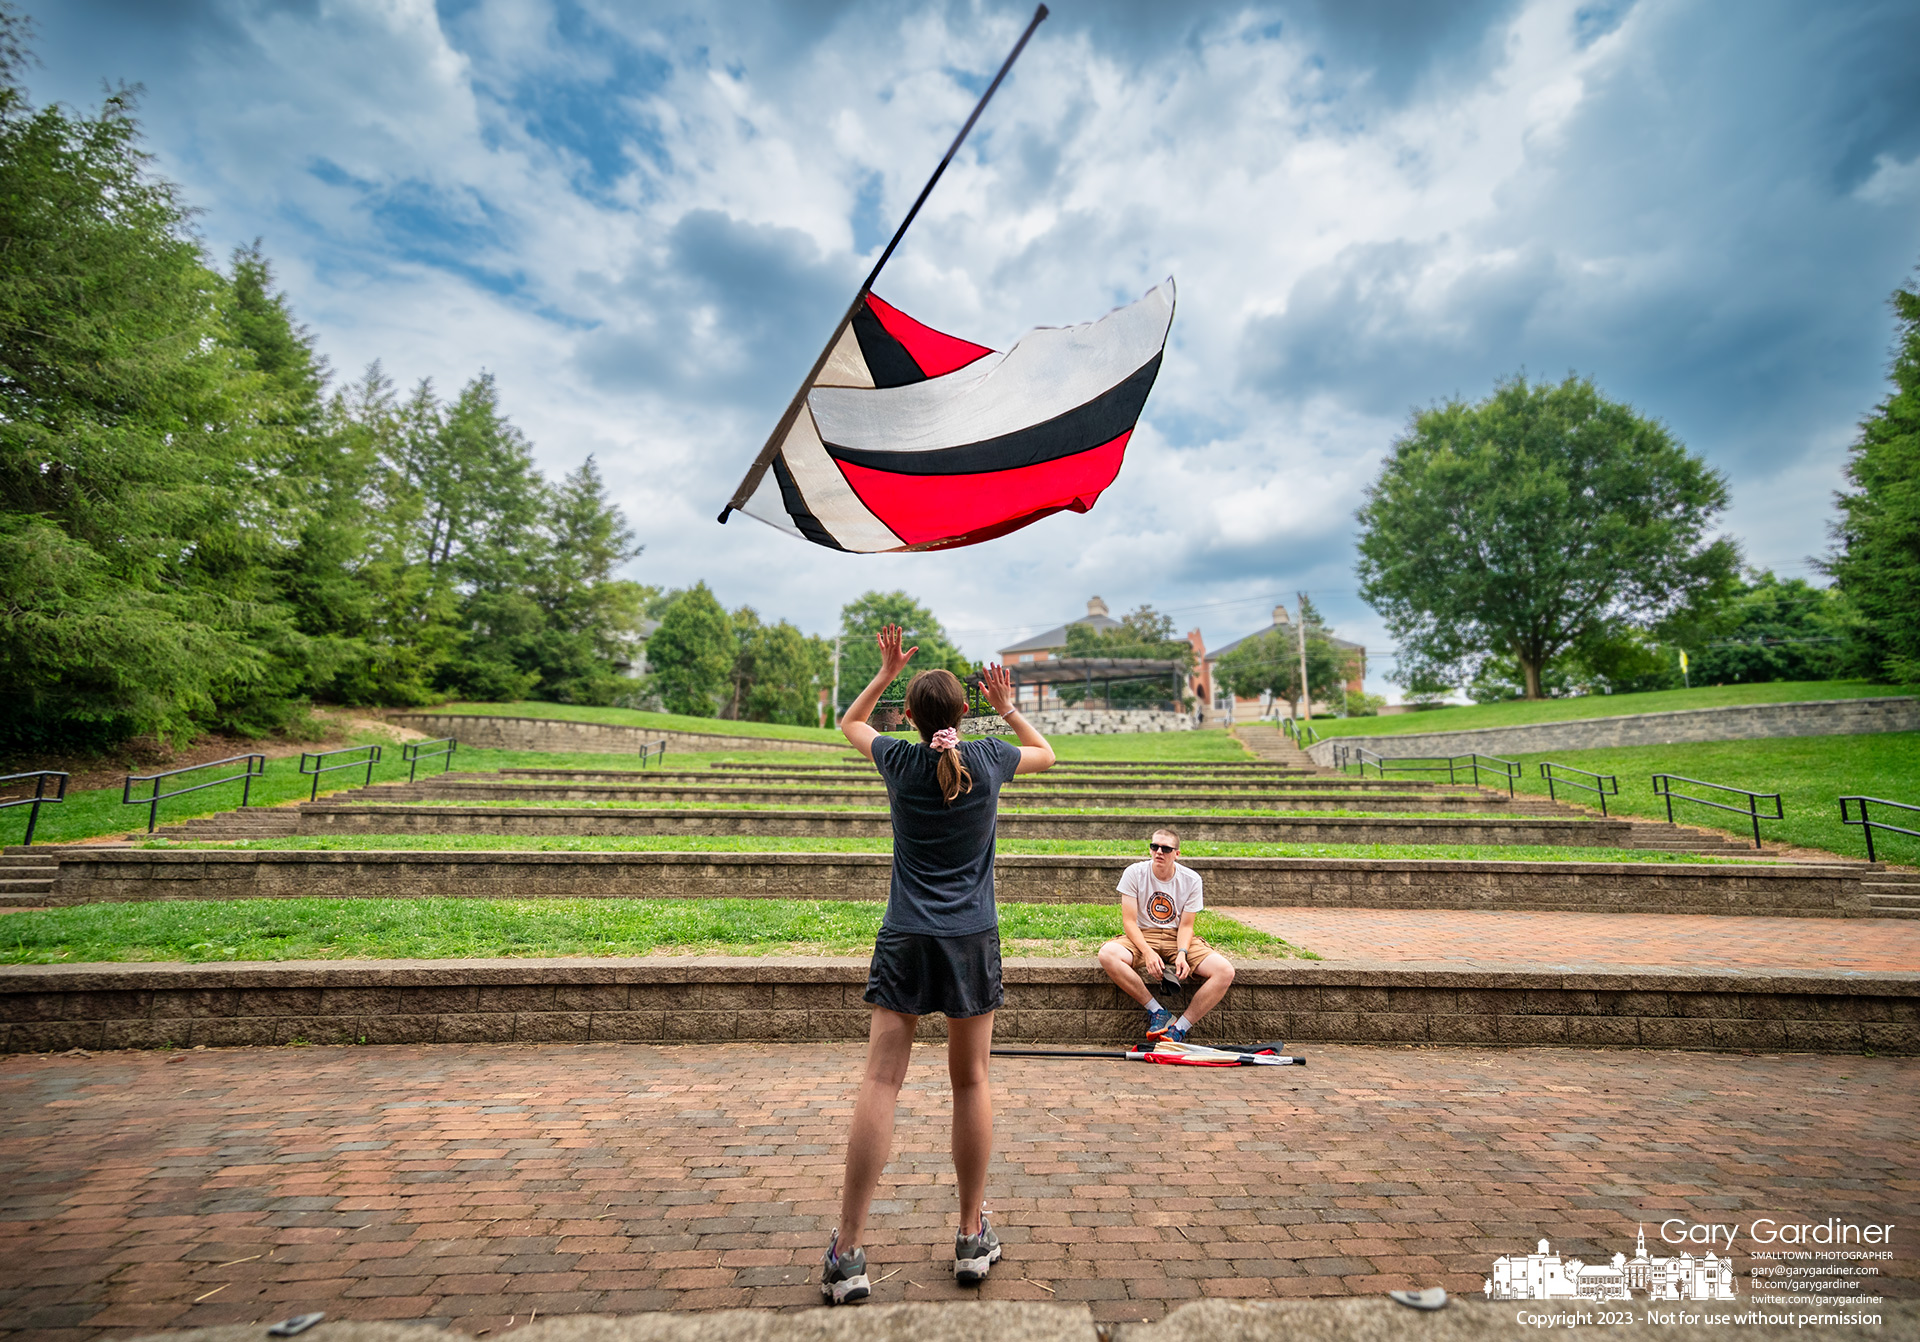 An Otterbein University Color Guard member practices with some of the team at the Alum Creel Park Amphitheater as they prepare for the start of football season at home on September 2 against Ohio Wesleyan University. My Final Photo for August 9, 2023.